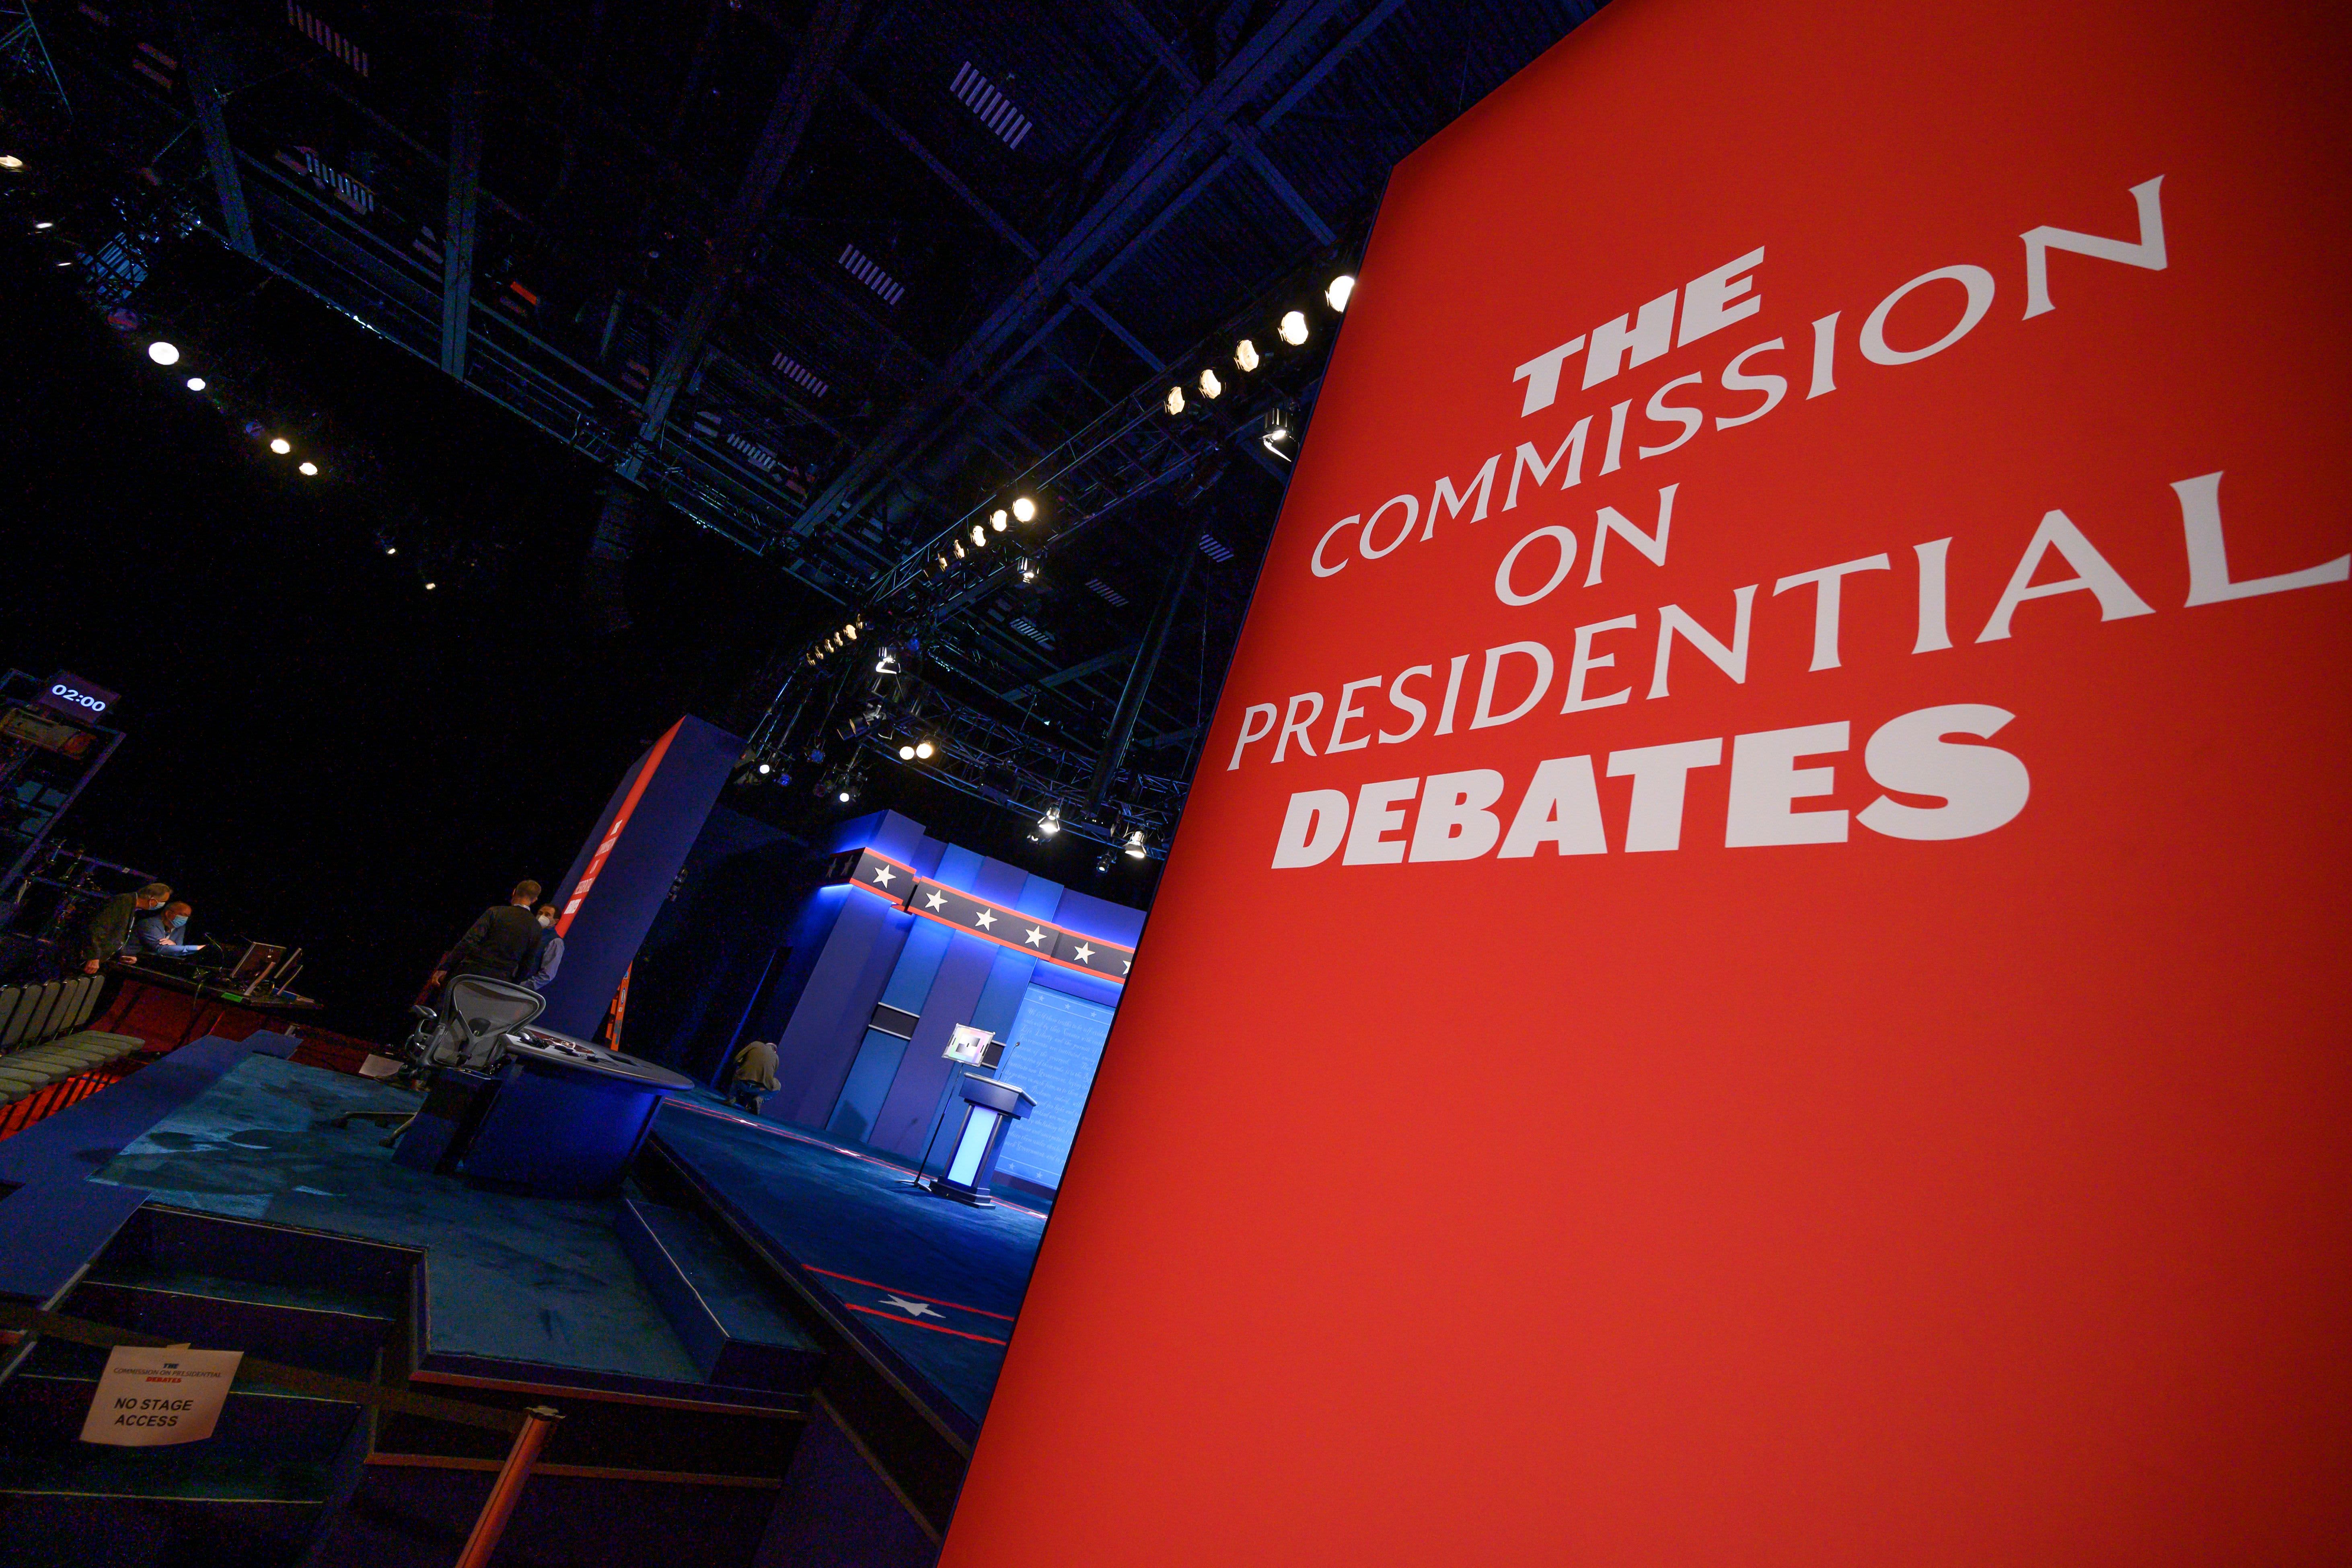 Republican National Committee threatens to pull nominees from presidential debates